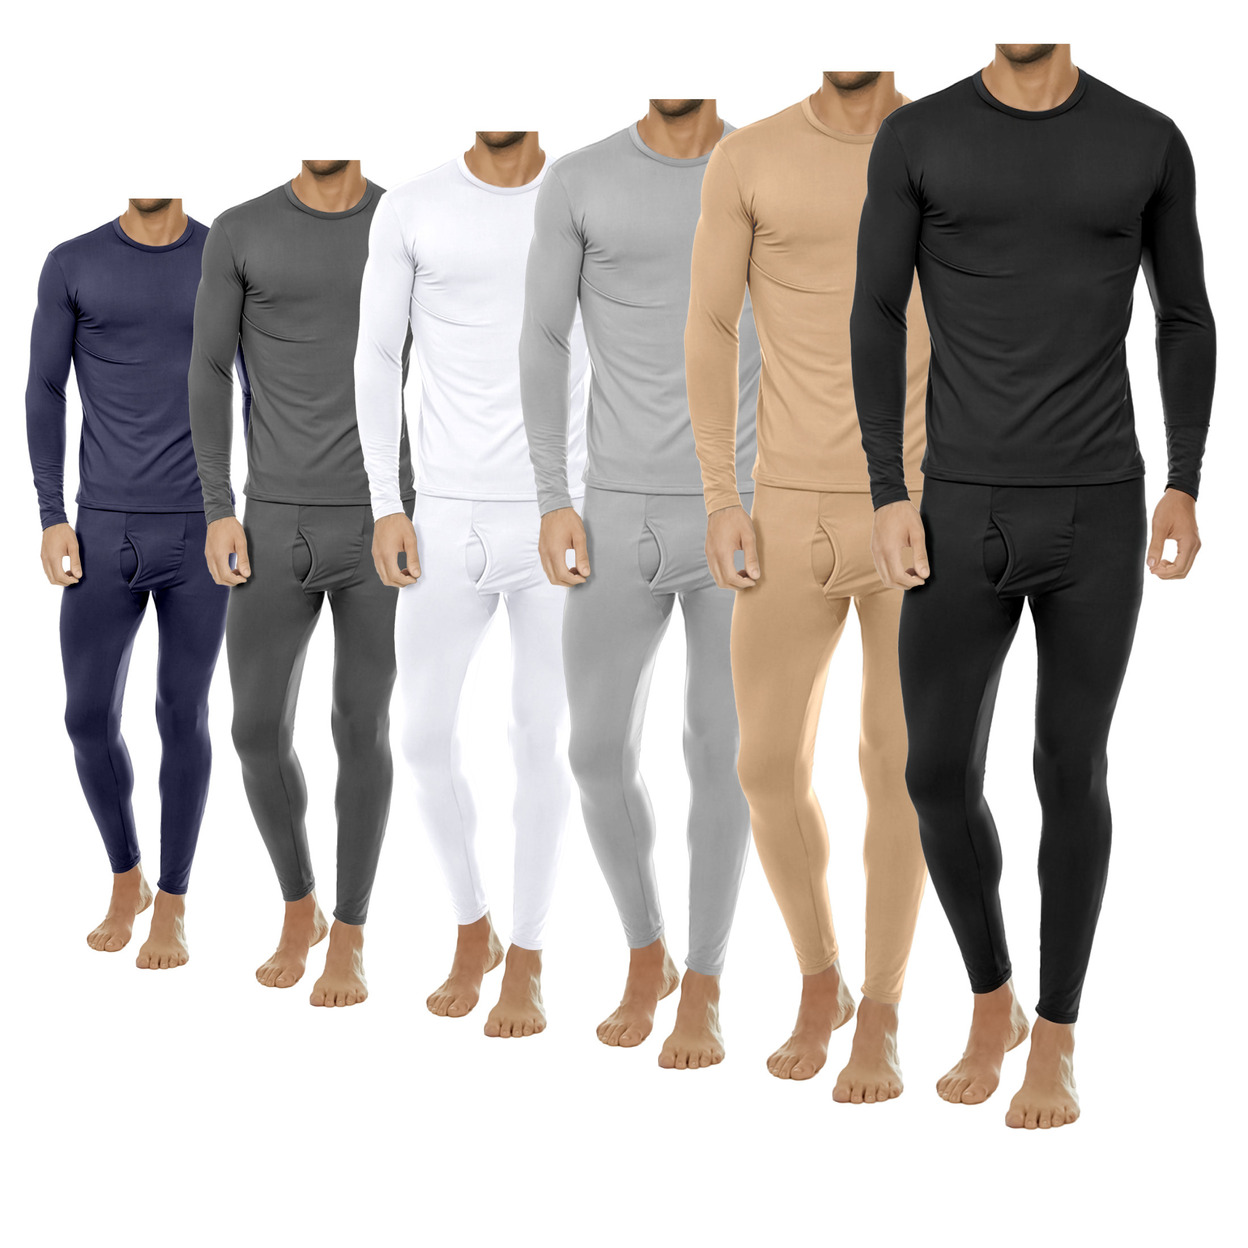 2-Pieces: Men's Winter Warm Fleece Lined Thermal Underwear Set For Cold Weather - Tan, Small